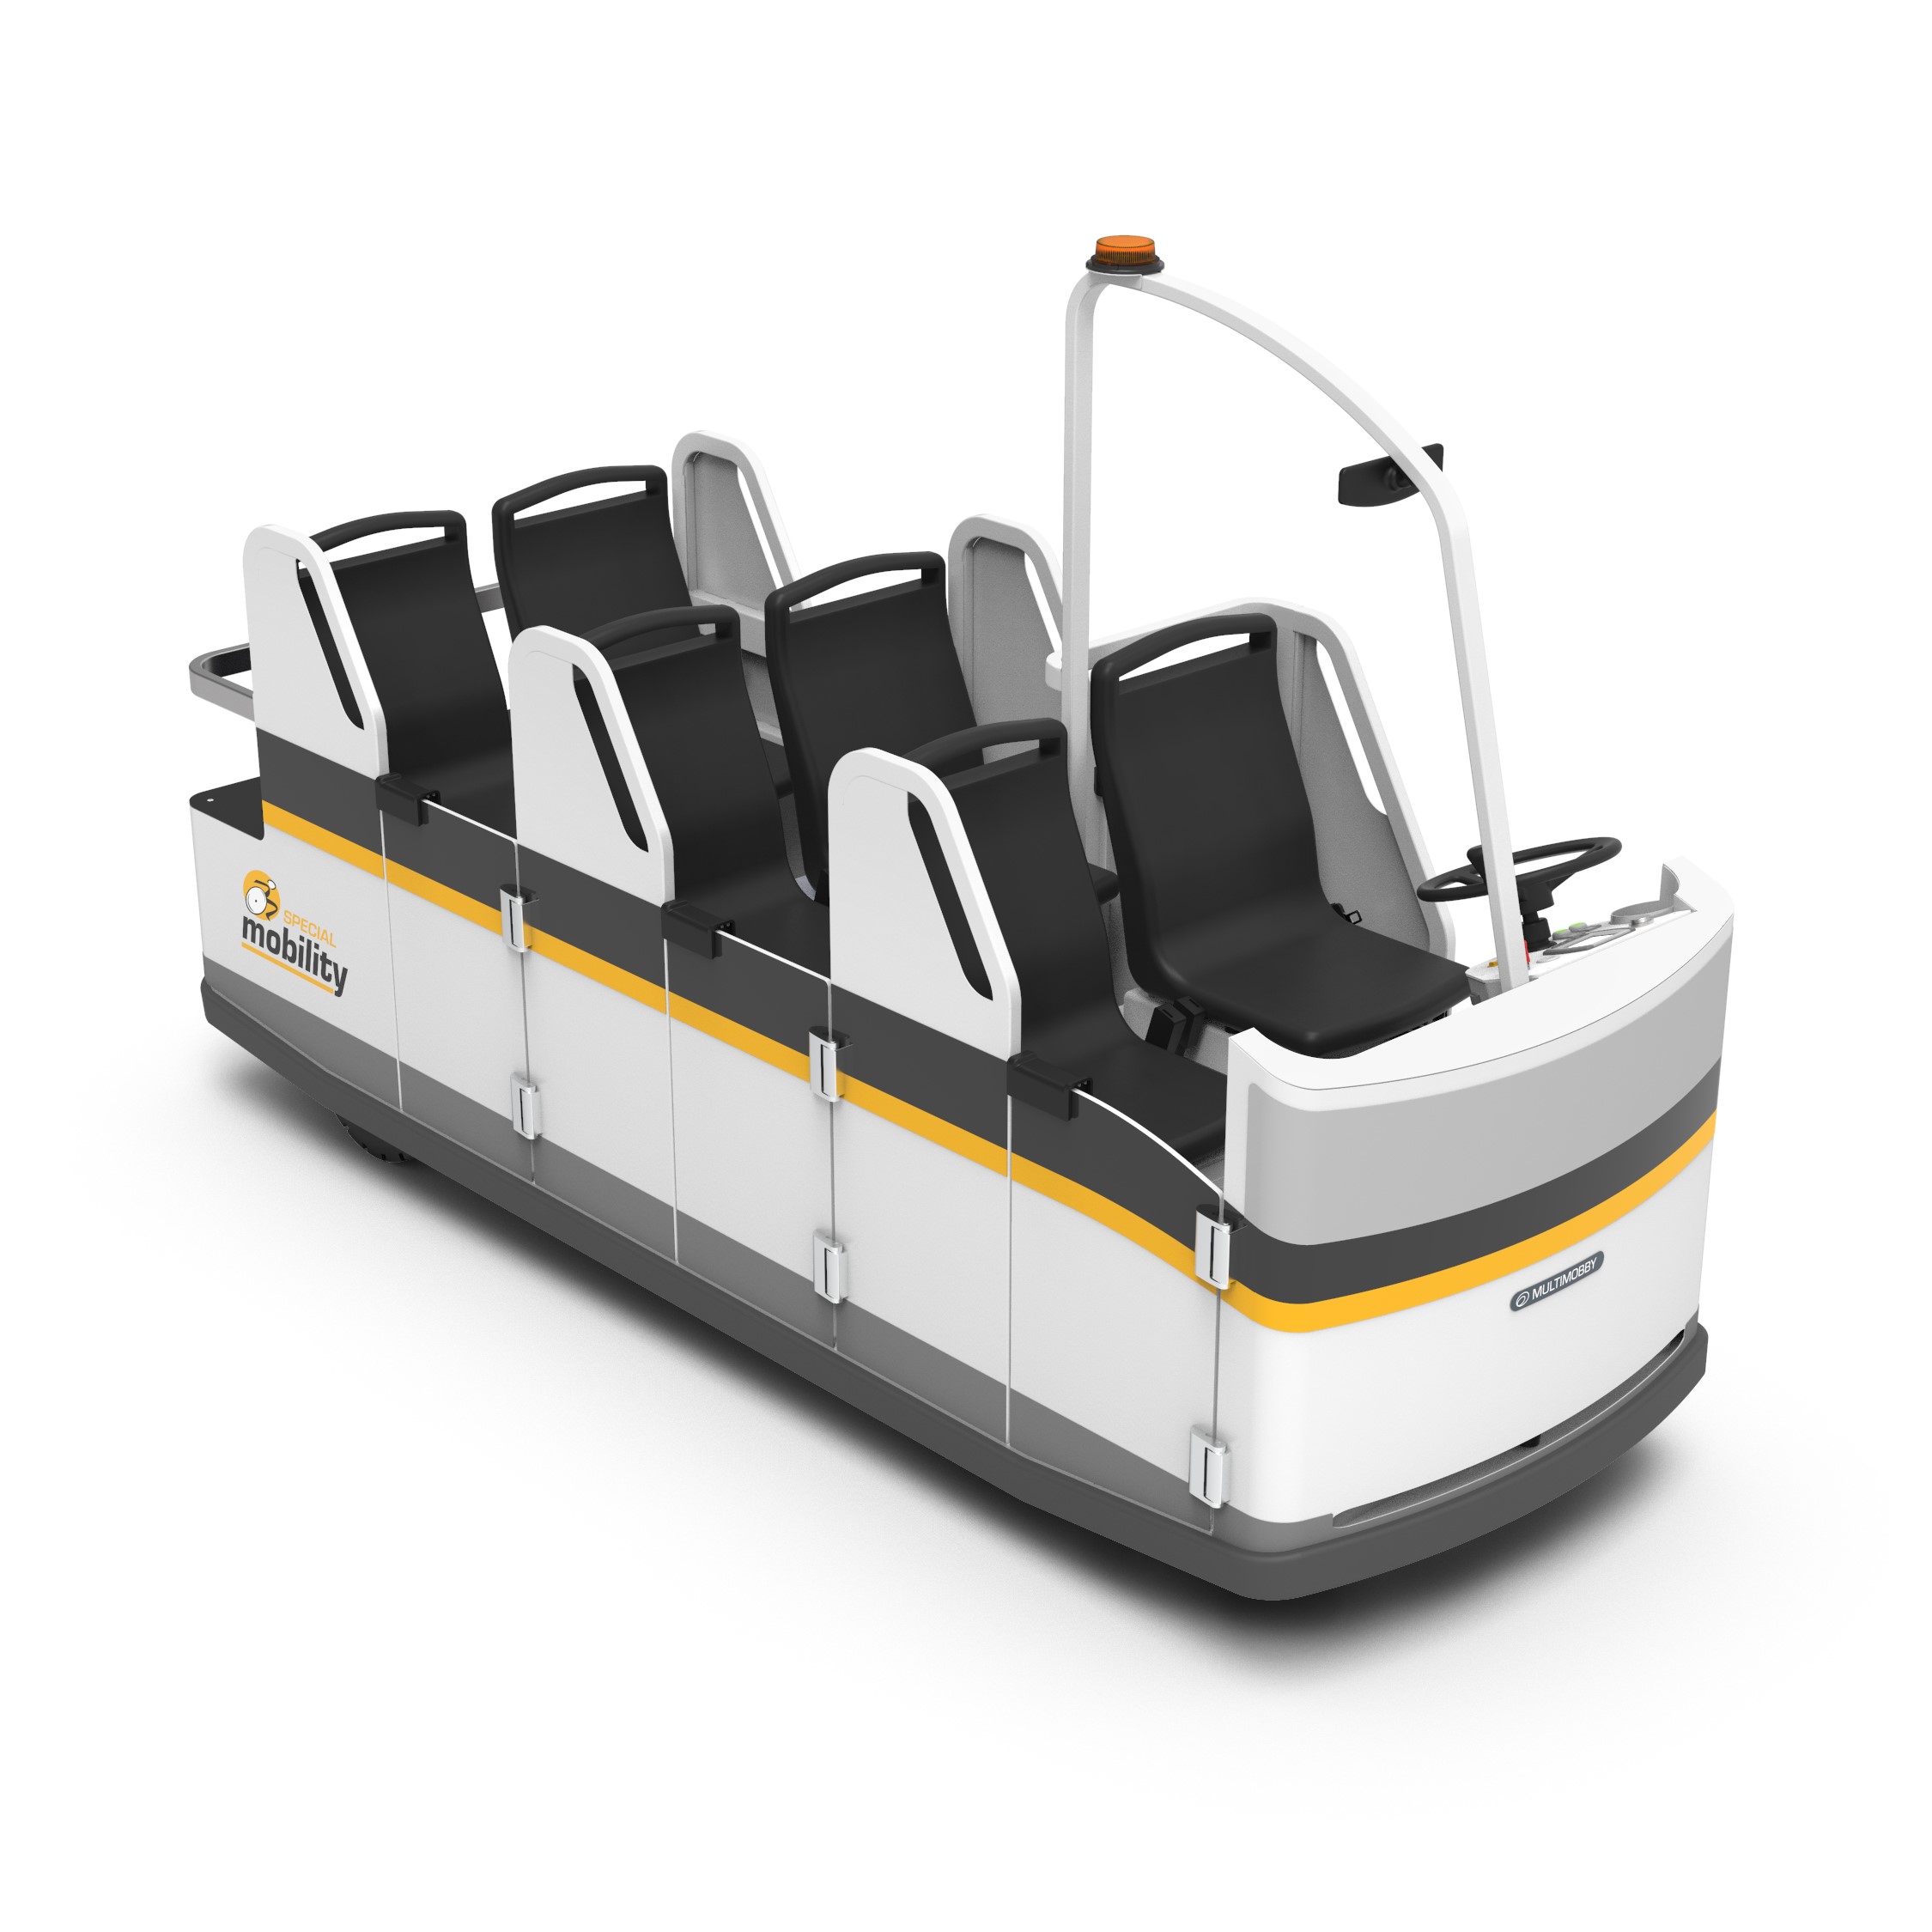 New Multimobby buggy for PRM